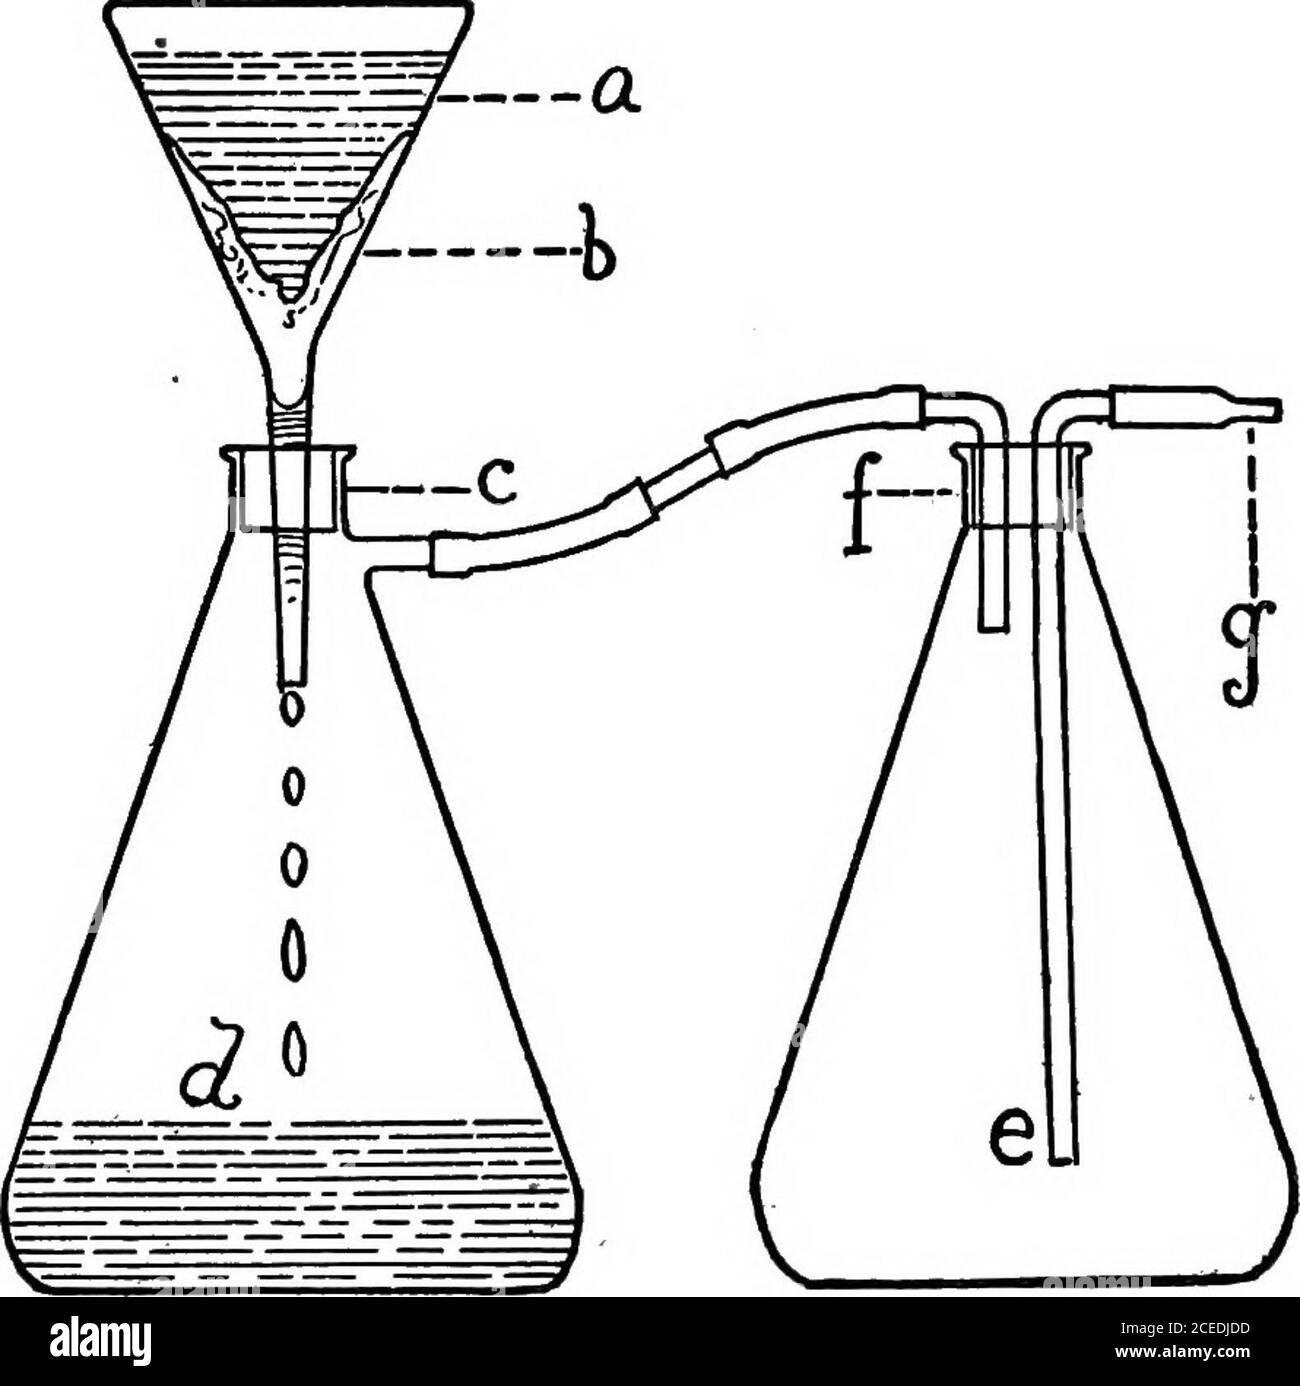 . A laboratory guide in bacteriology, for the use of students, teachers, and practitioners. dium may befiltered rapidly by the use of suitable apparatus, asillustrated in Fig. 14. At the connection with thevacuum pump a valve should be inserted or a flaskarranged as in the illustration, to prevent the waterfrom entering the flask if the water pressure should bereduced suddenly. If some precautions are properly observed, chieflythe making of a good filter with sharp edges and asharp point, and the soaking of this in hot water, thereis no difSculty in filtering agar or gelatin successfullyin a s Stock Photo